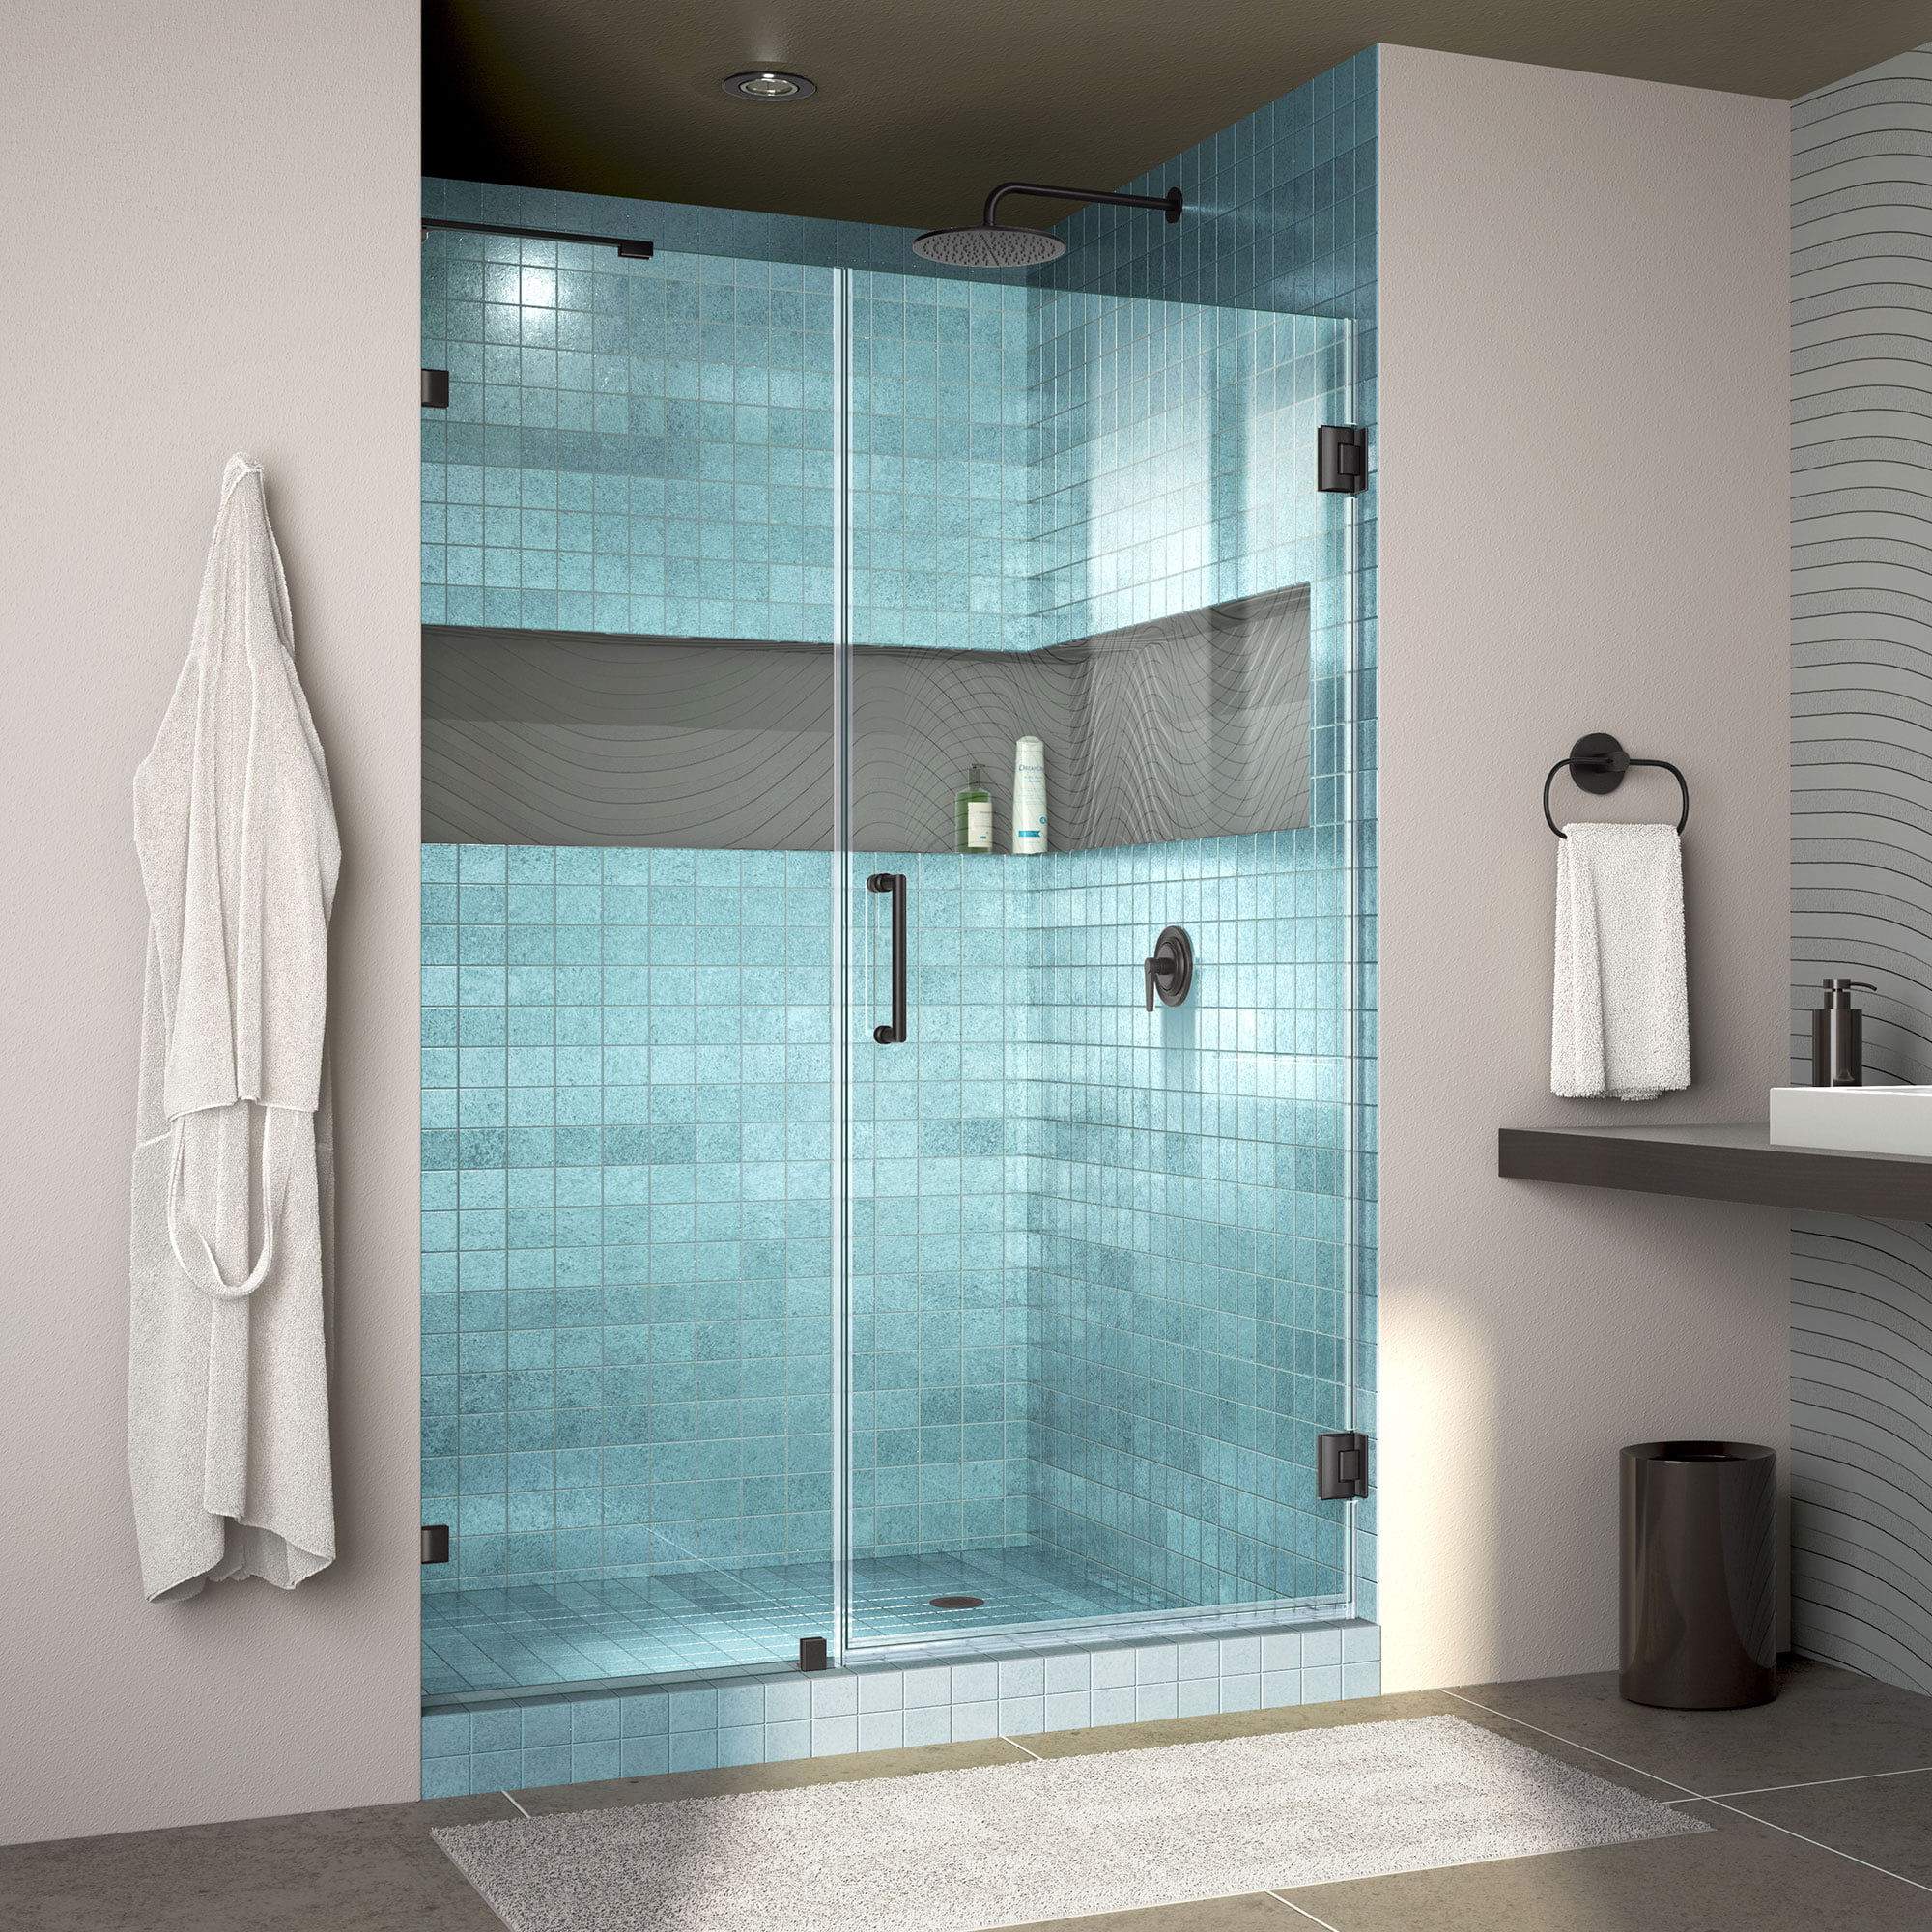 DreamLine Unidoor Lux 49 in. W x 72 in. H Fully Frameless Hinged Shower Door with L-Bar in Satin Black